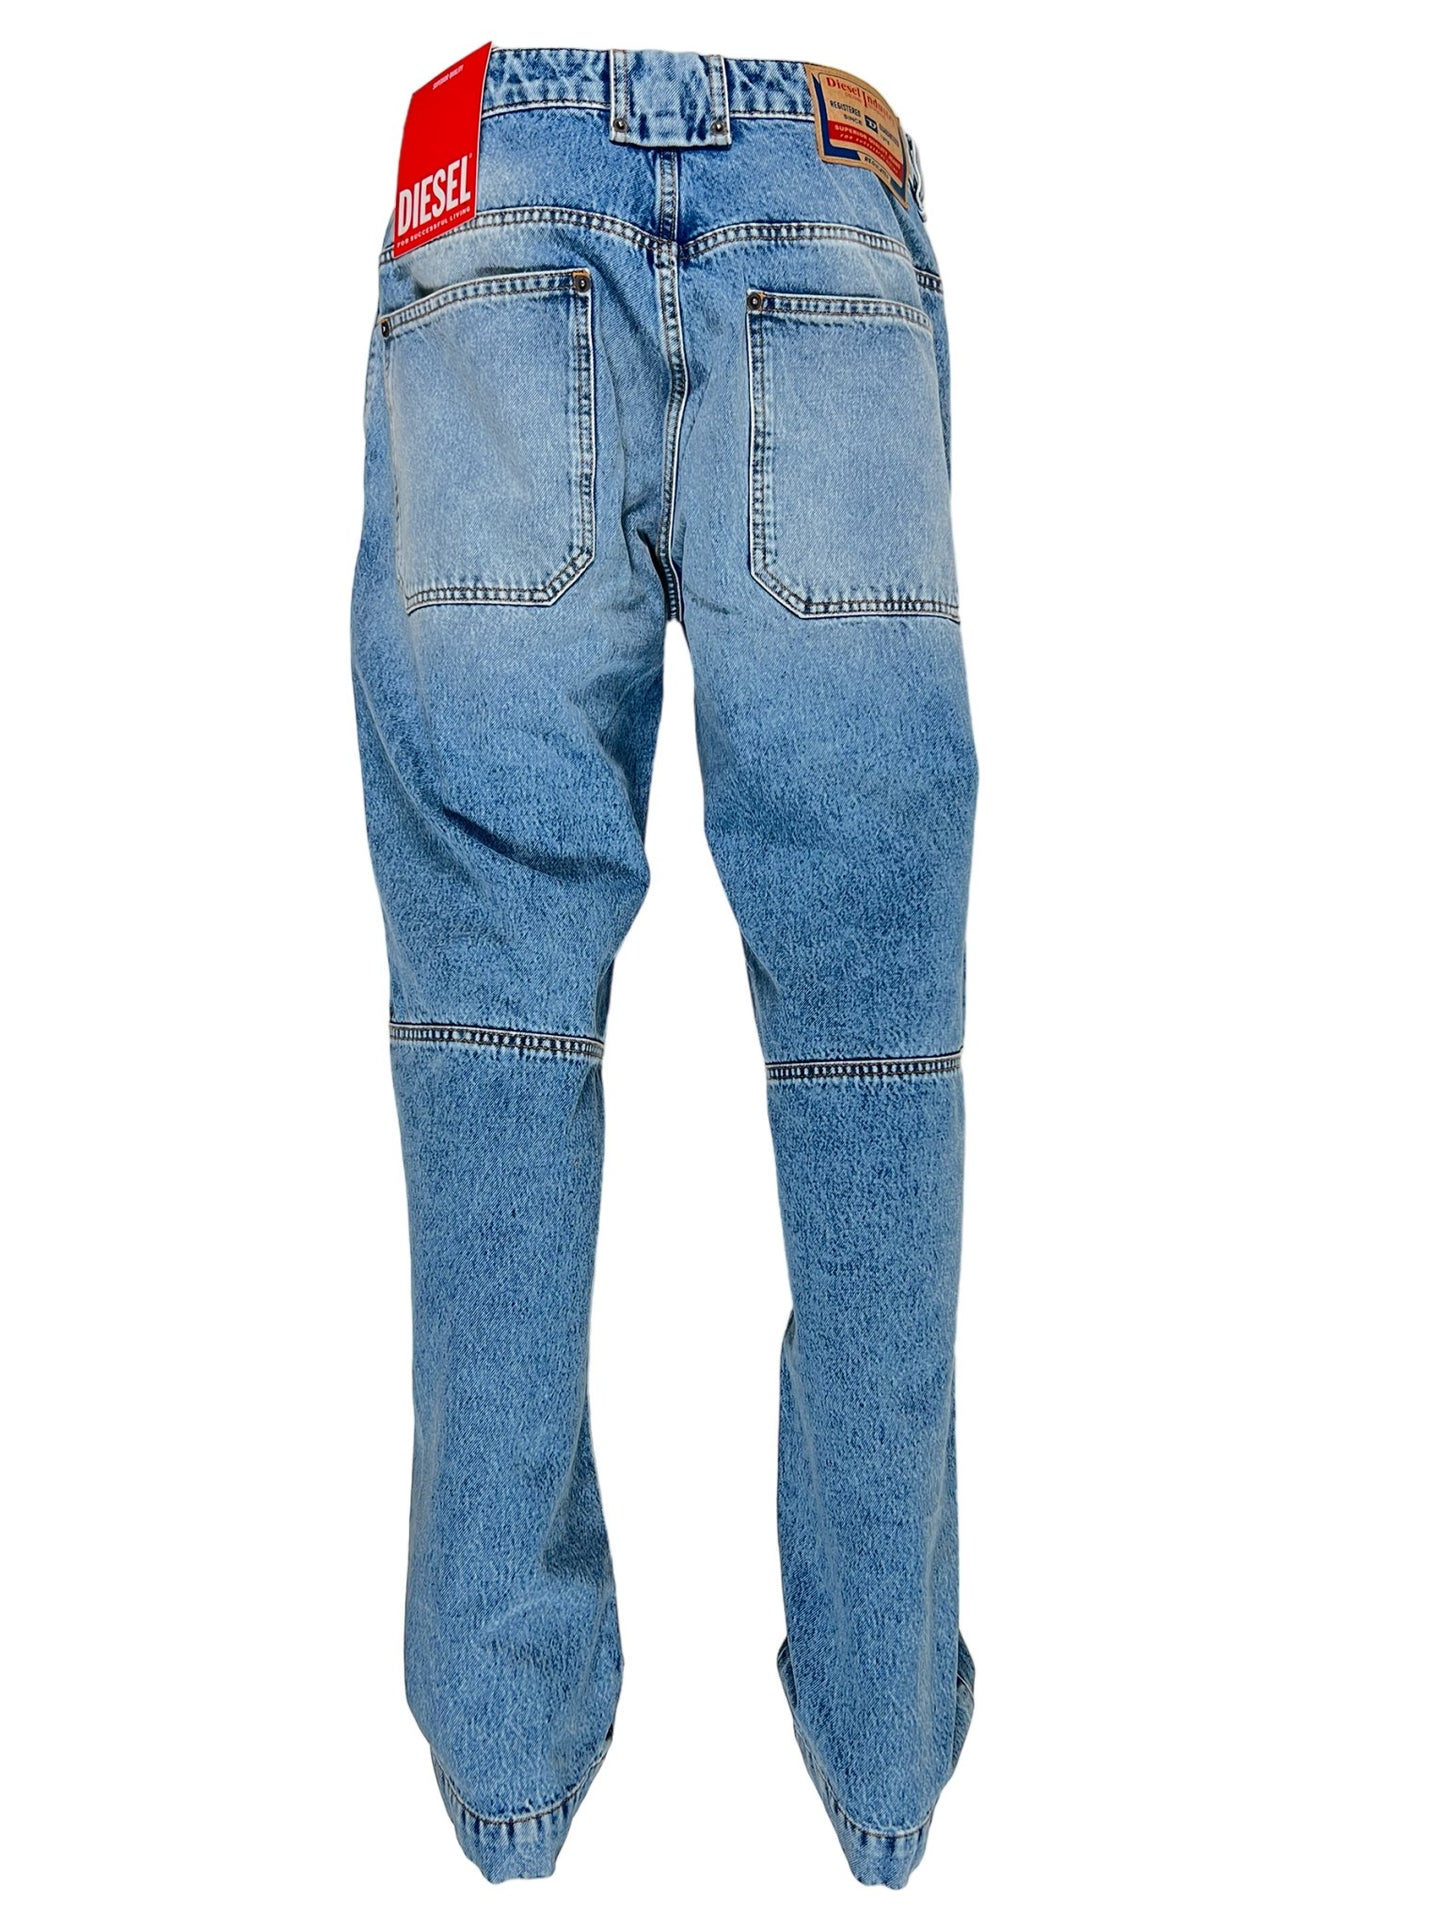 DIESEL brand DIESEL D-P-5-D-S JEANS GHAW isolated on a white background.